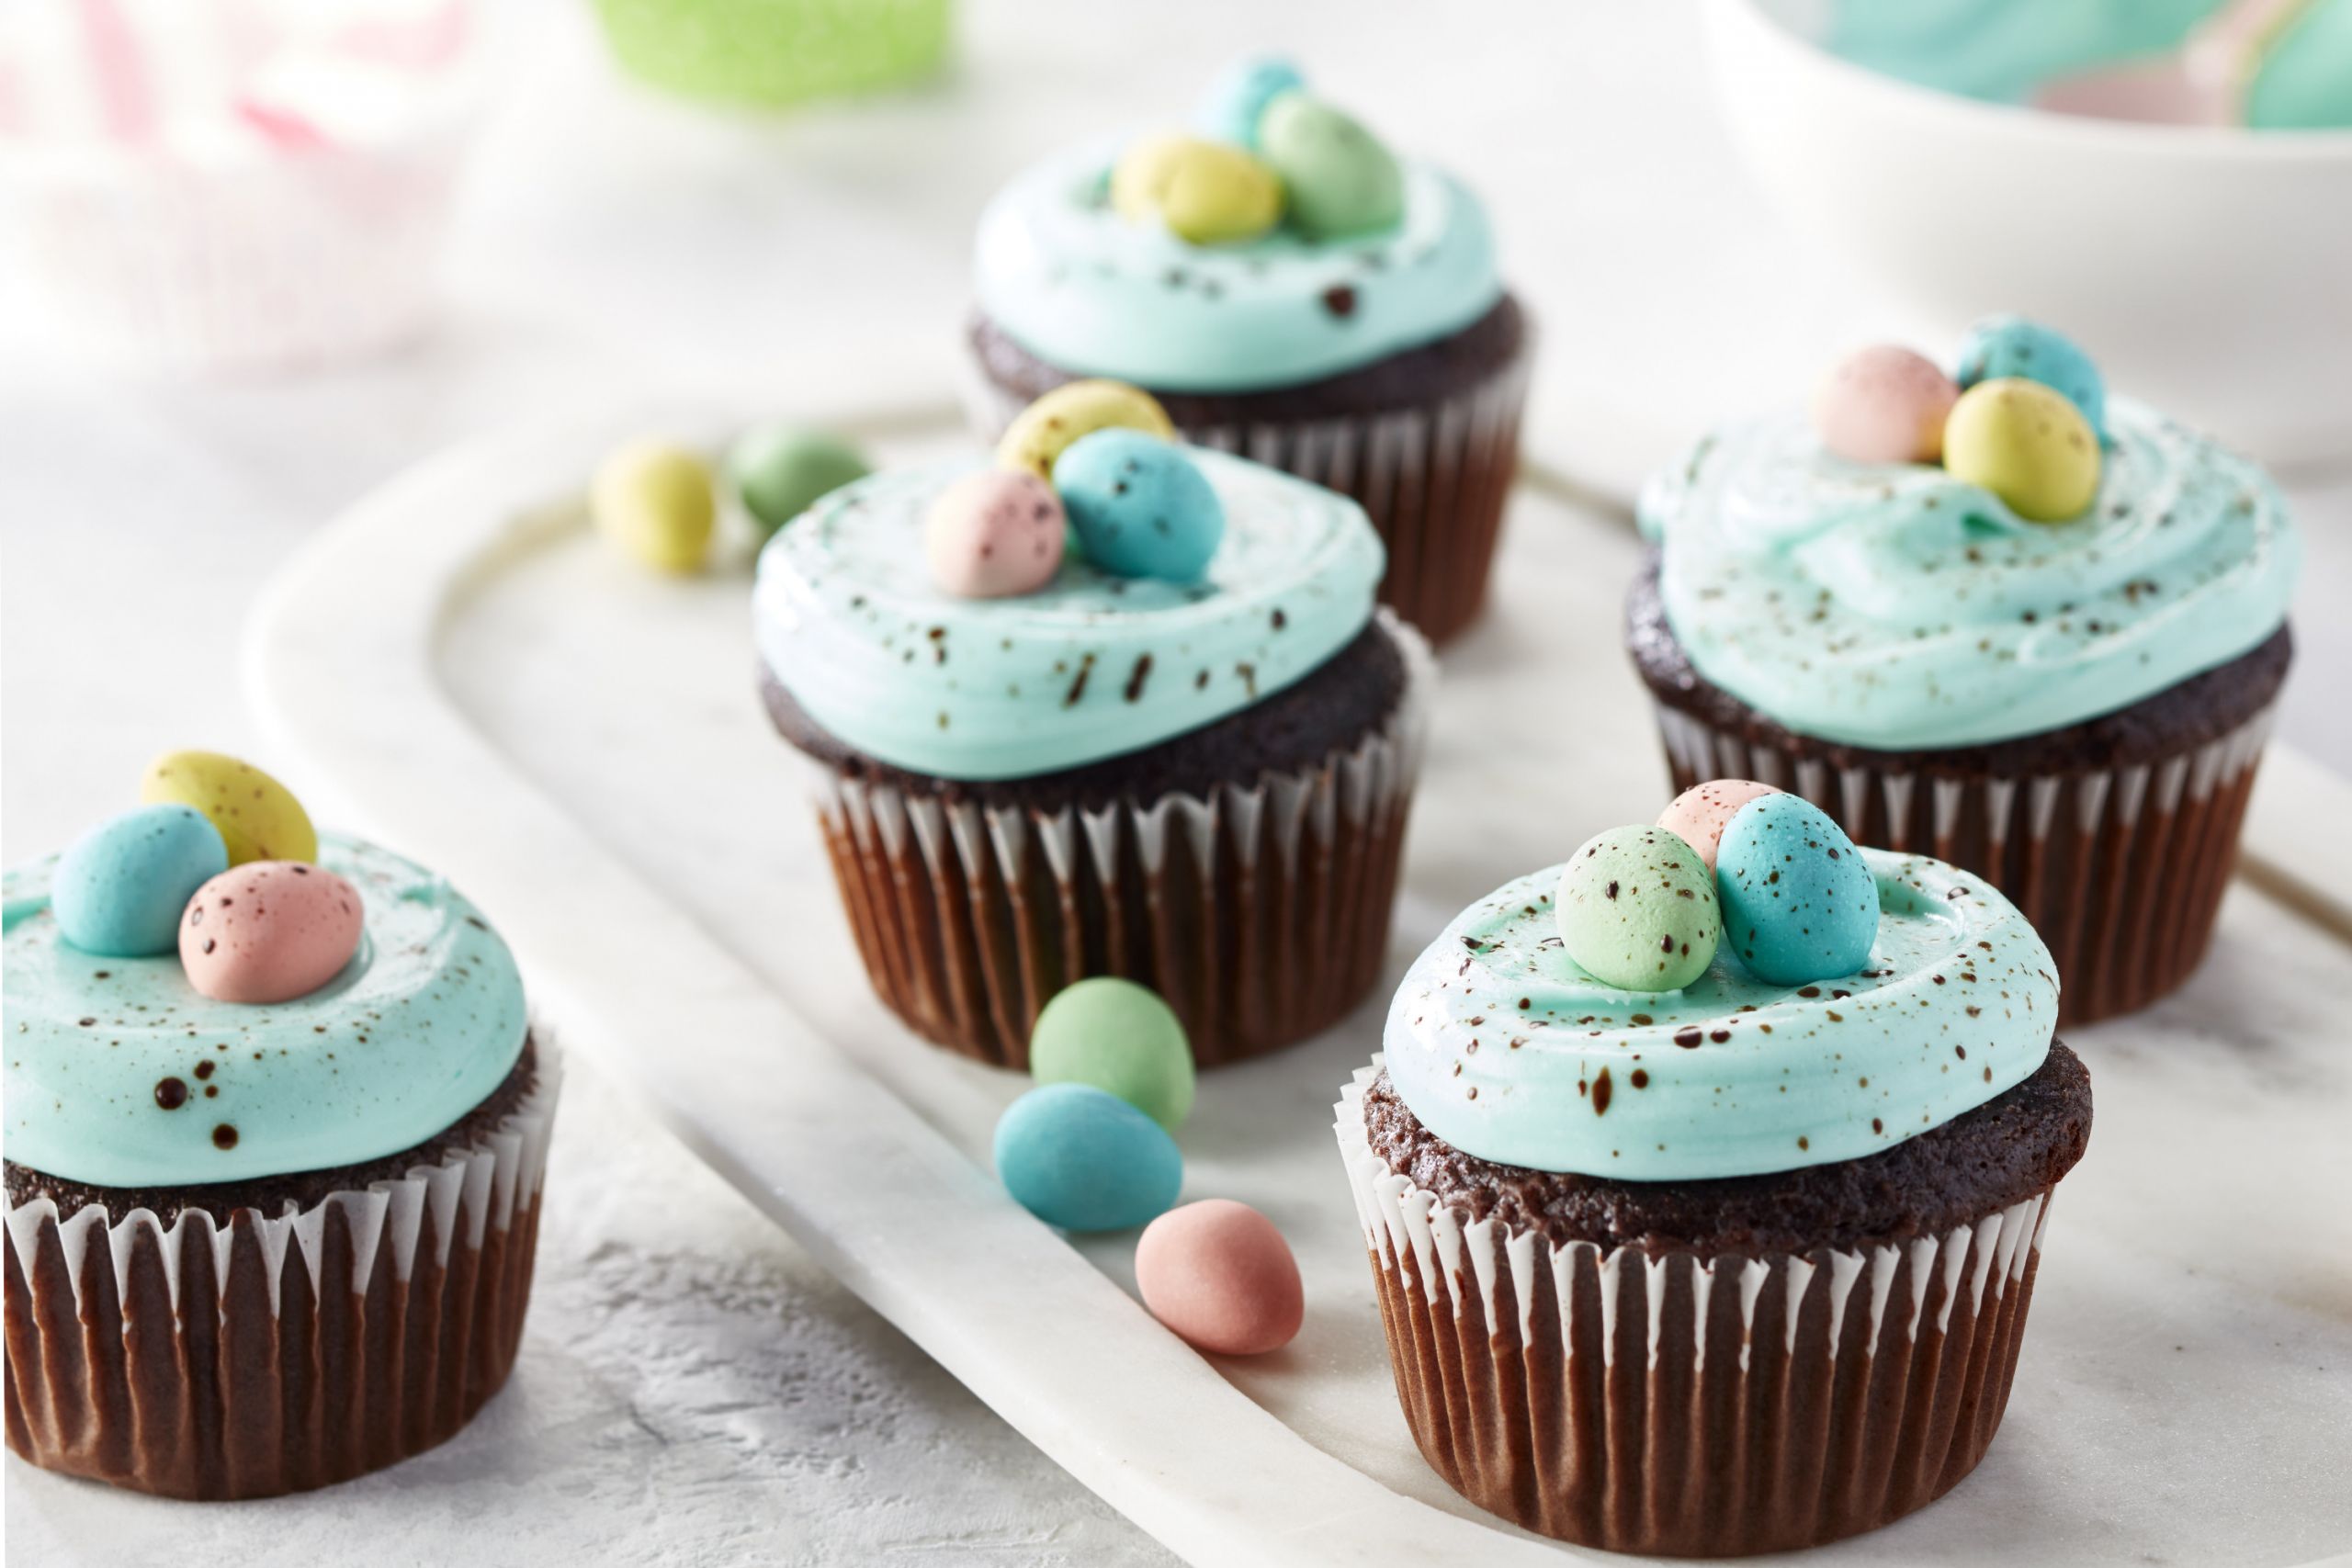 Don’t Miss Our 15 Most Shared Easter Cupcakes Recipes